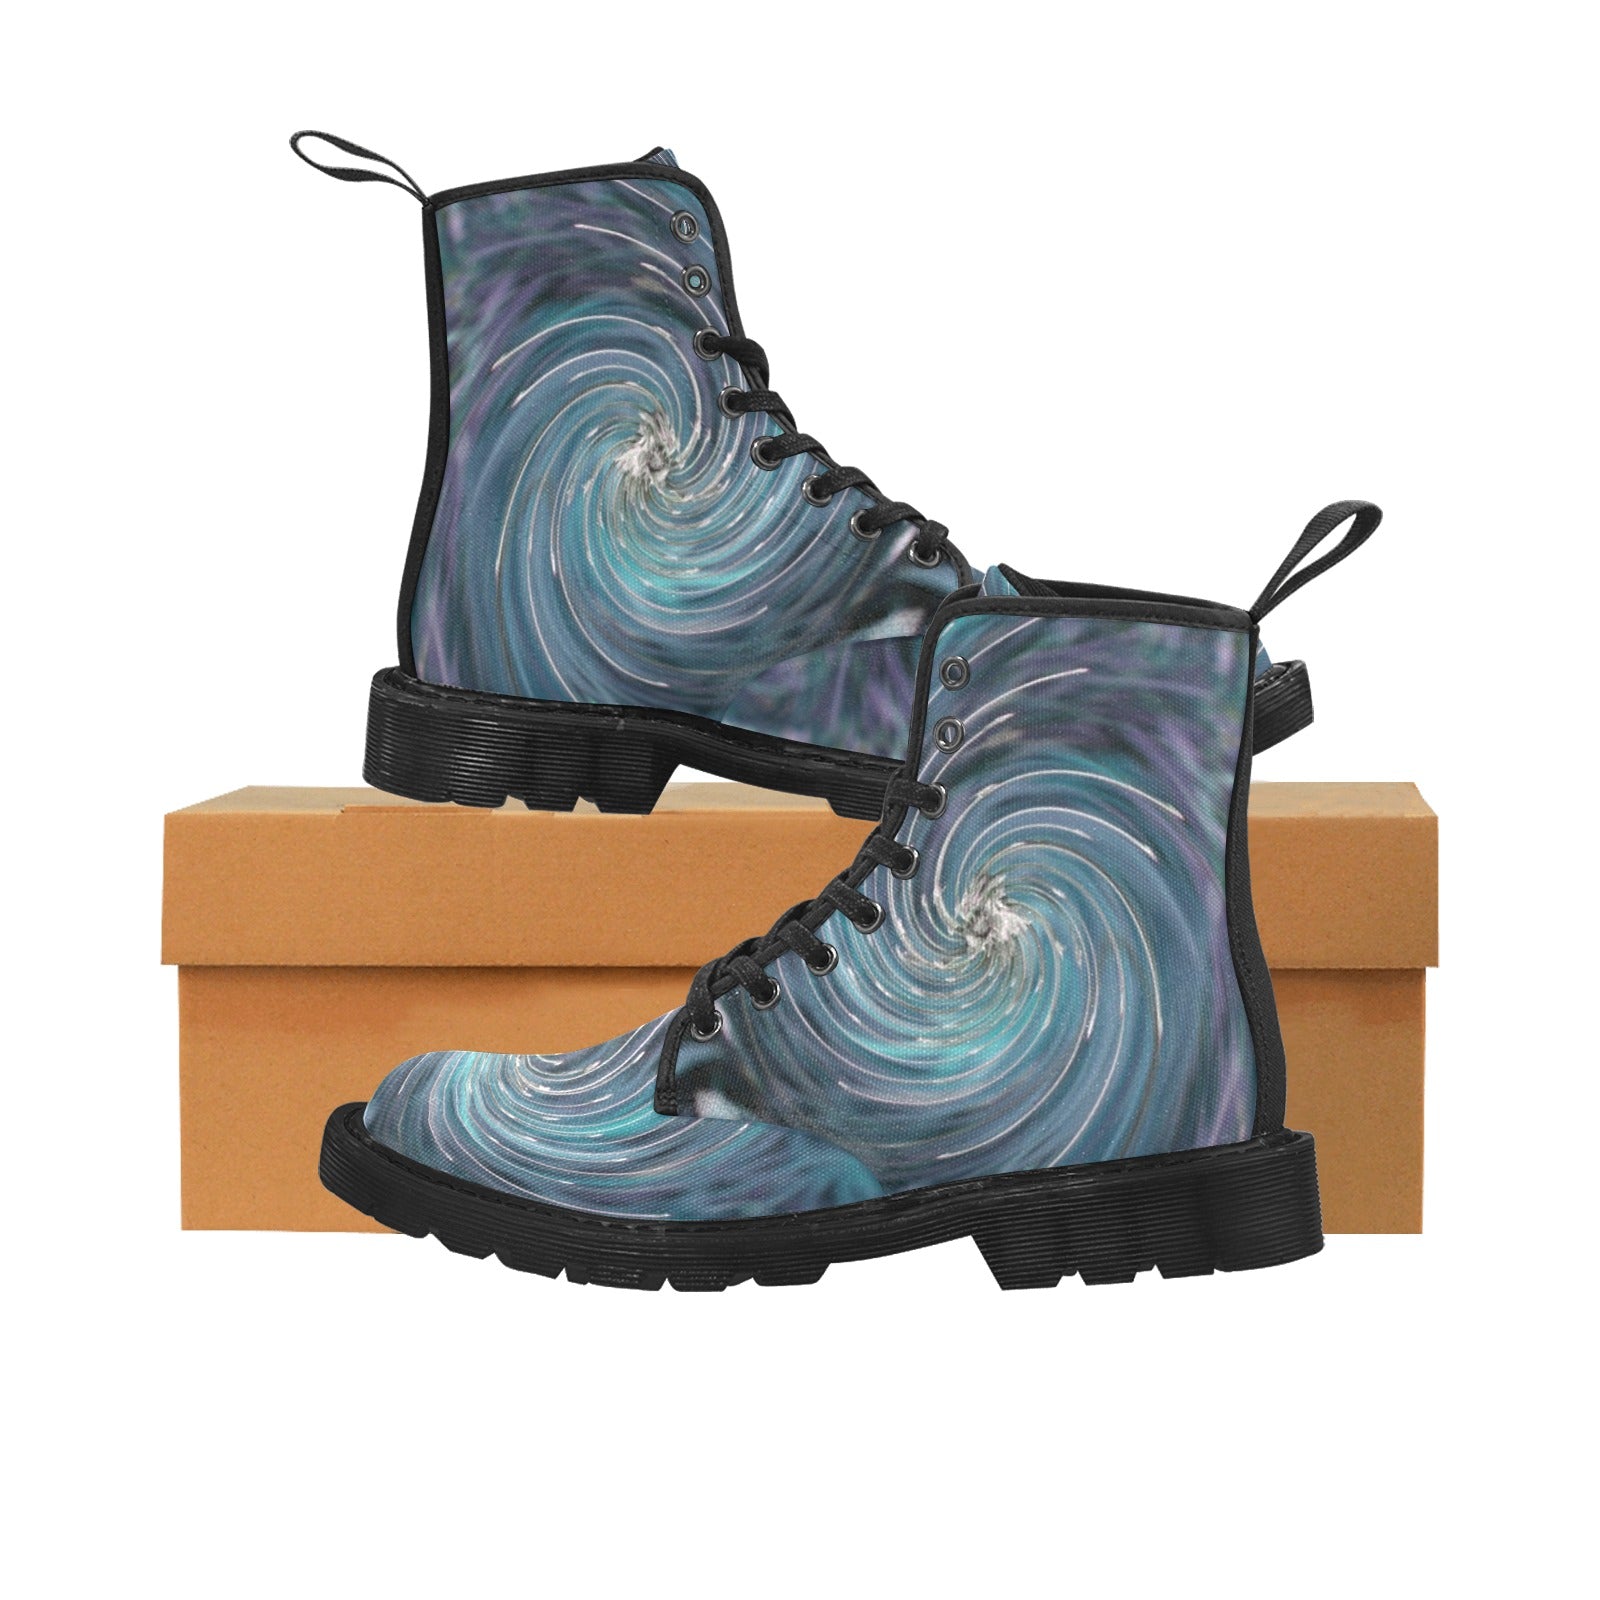 Boots for Women, Cool Abstract Retro Black and Teal Cosmic Swirl - Black